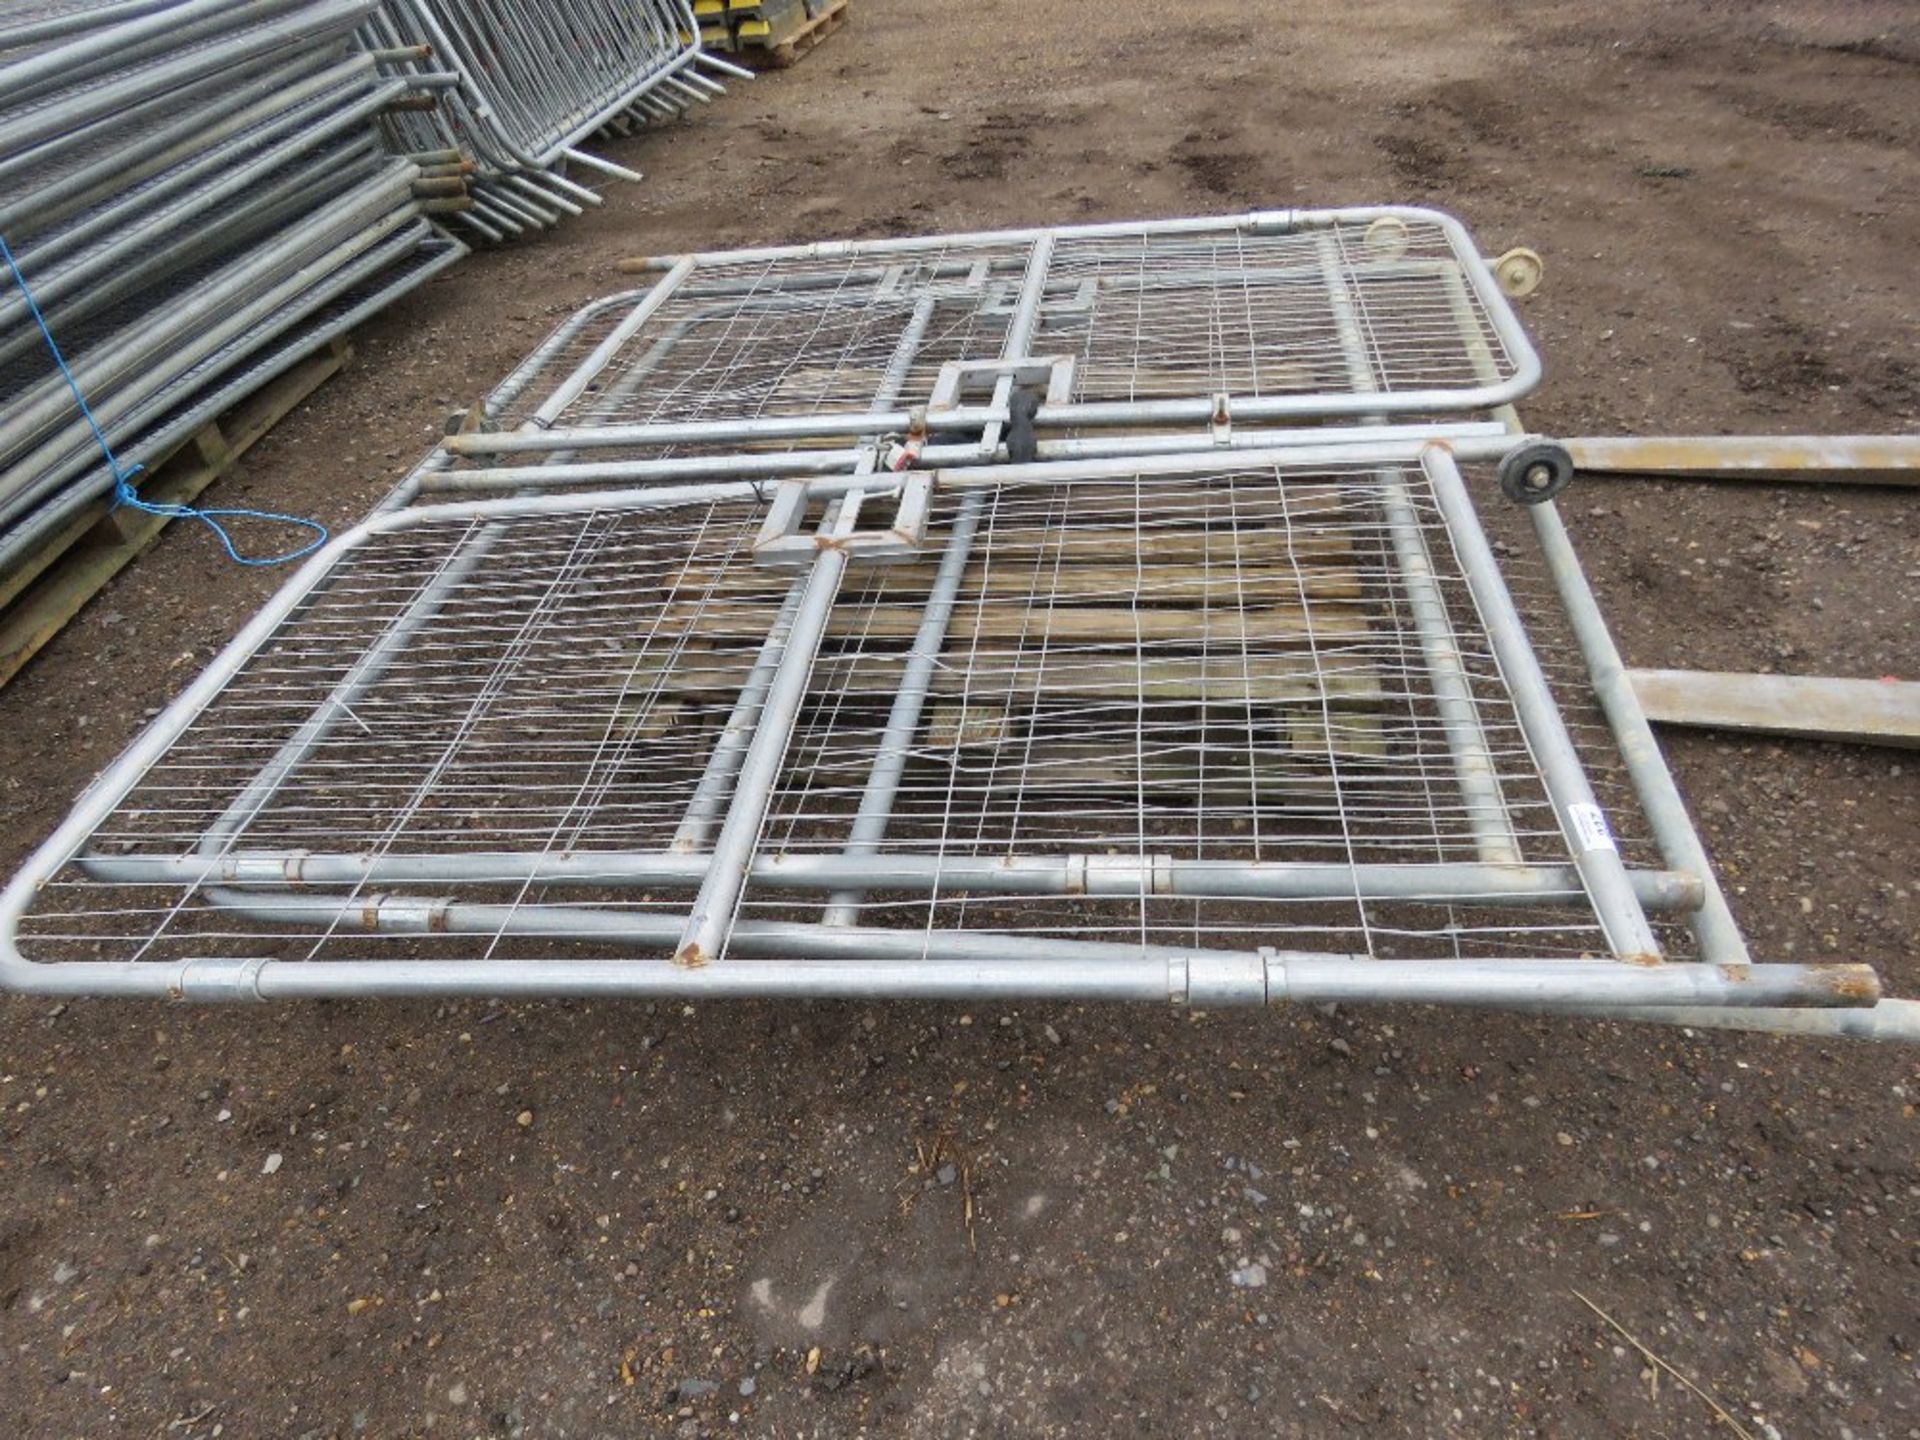 4 x HERAS TYPE TEMPORARY SITE FENCE PANEL GATES; 2@1M PLUS 2 @2M APPROX. - Image 2 of 3